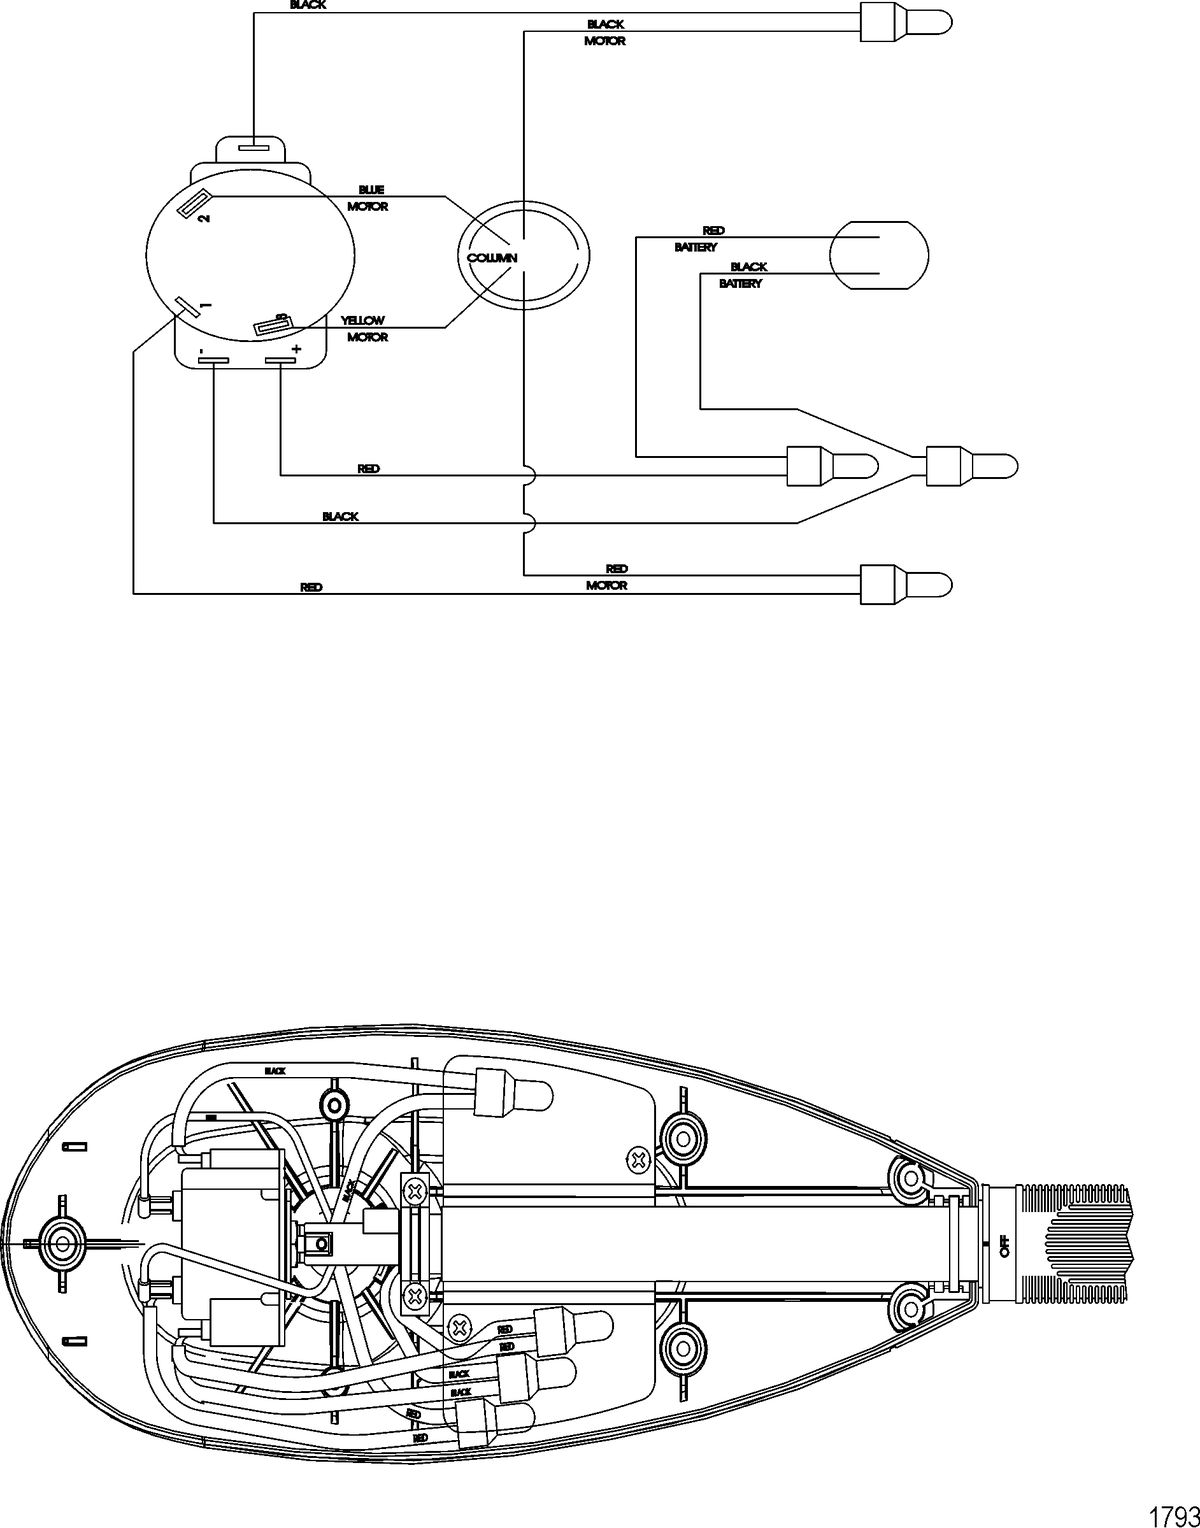 TROLLING MOTOR MOTORGUIDE THRUSTER SERIES Wire Diagram(Model T36) (Without Quick Connect)